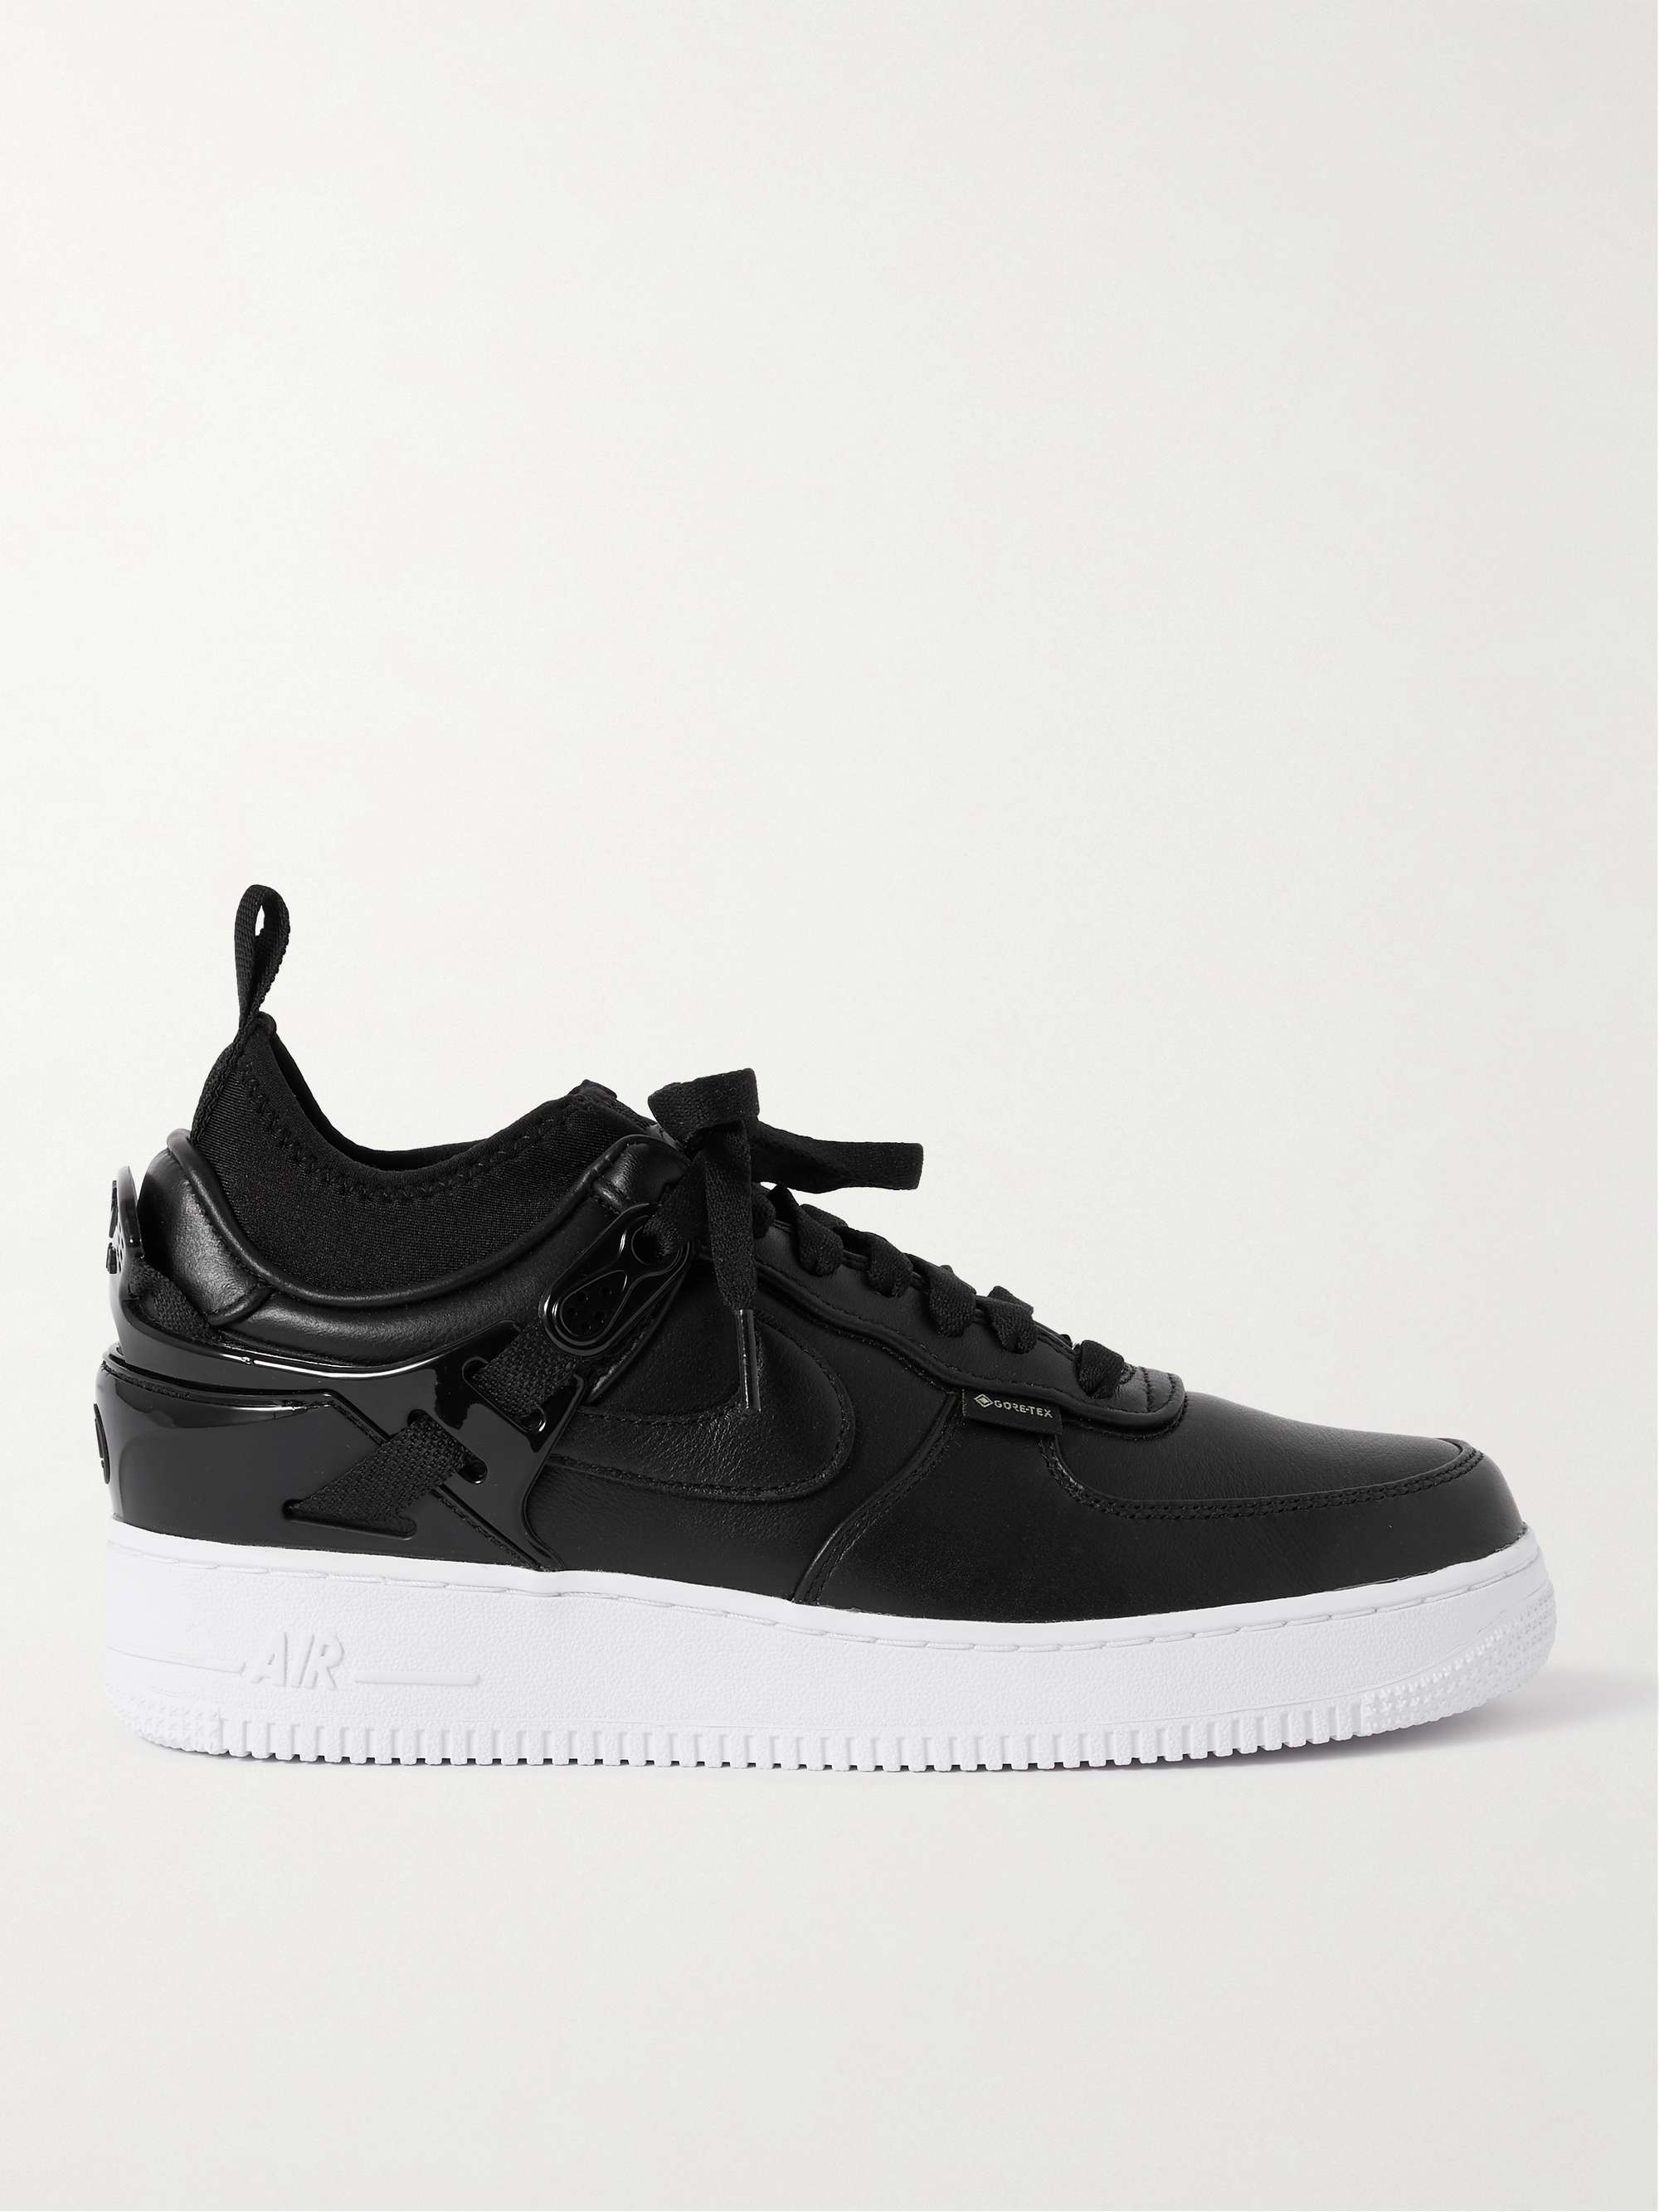 NIKE + Undercover Air Force 1 Rubber-Trimmed Leather Sneakers | MR PORTER